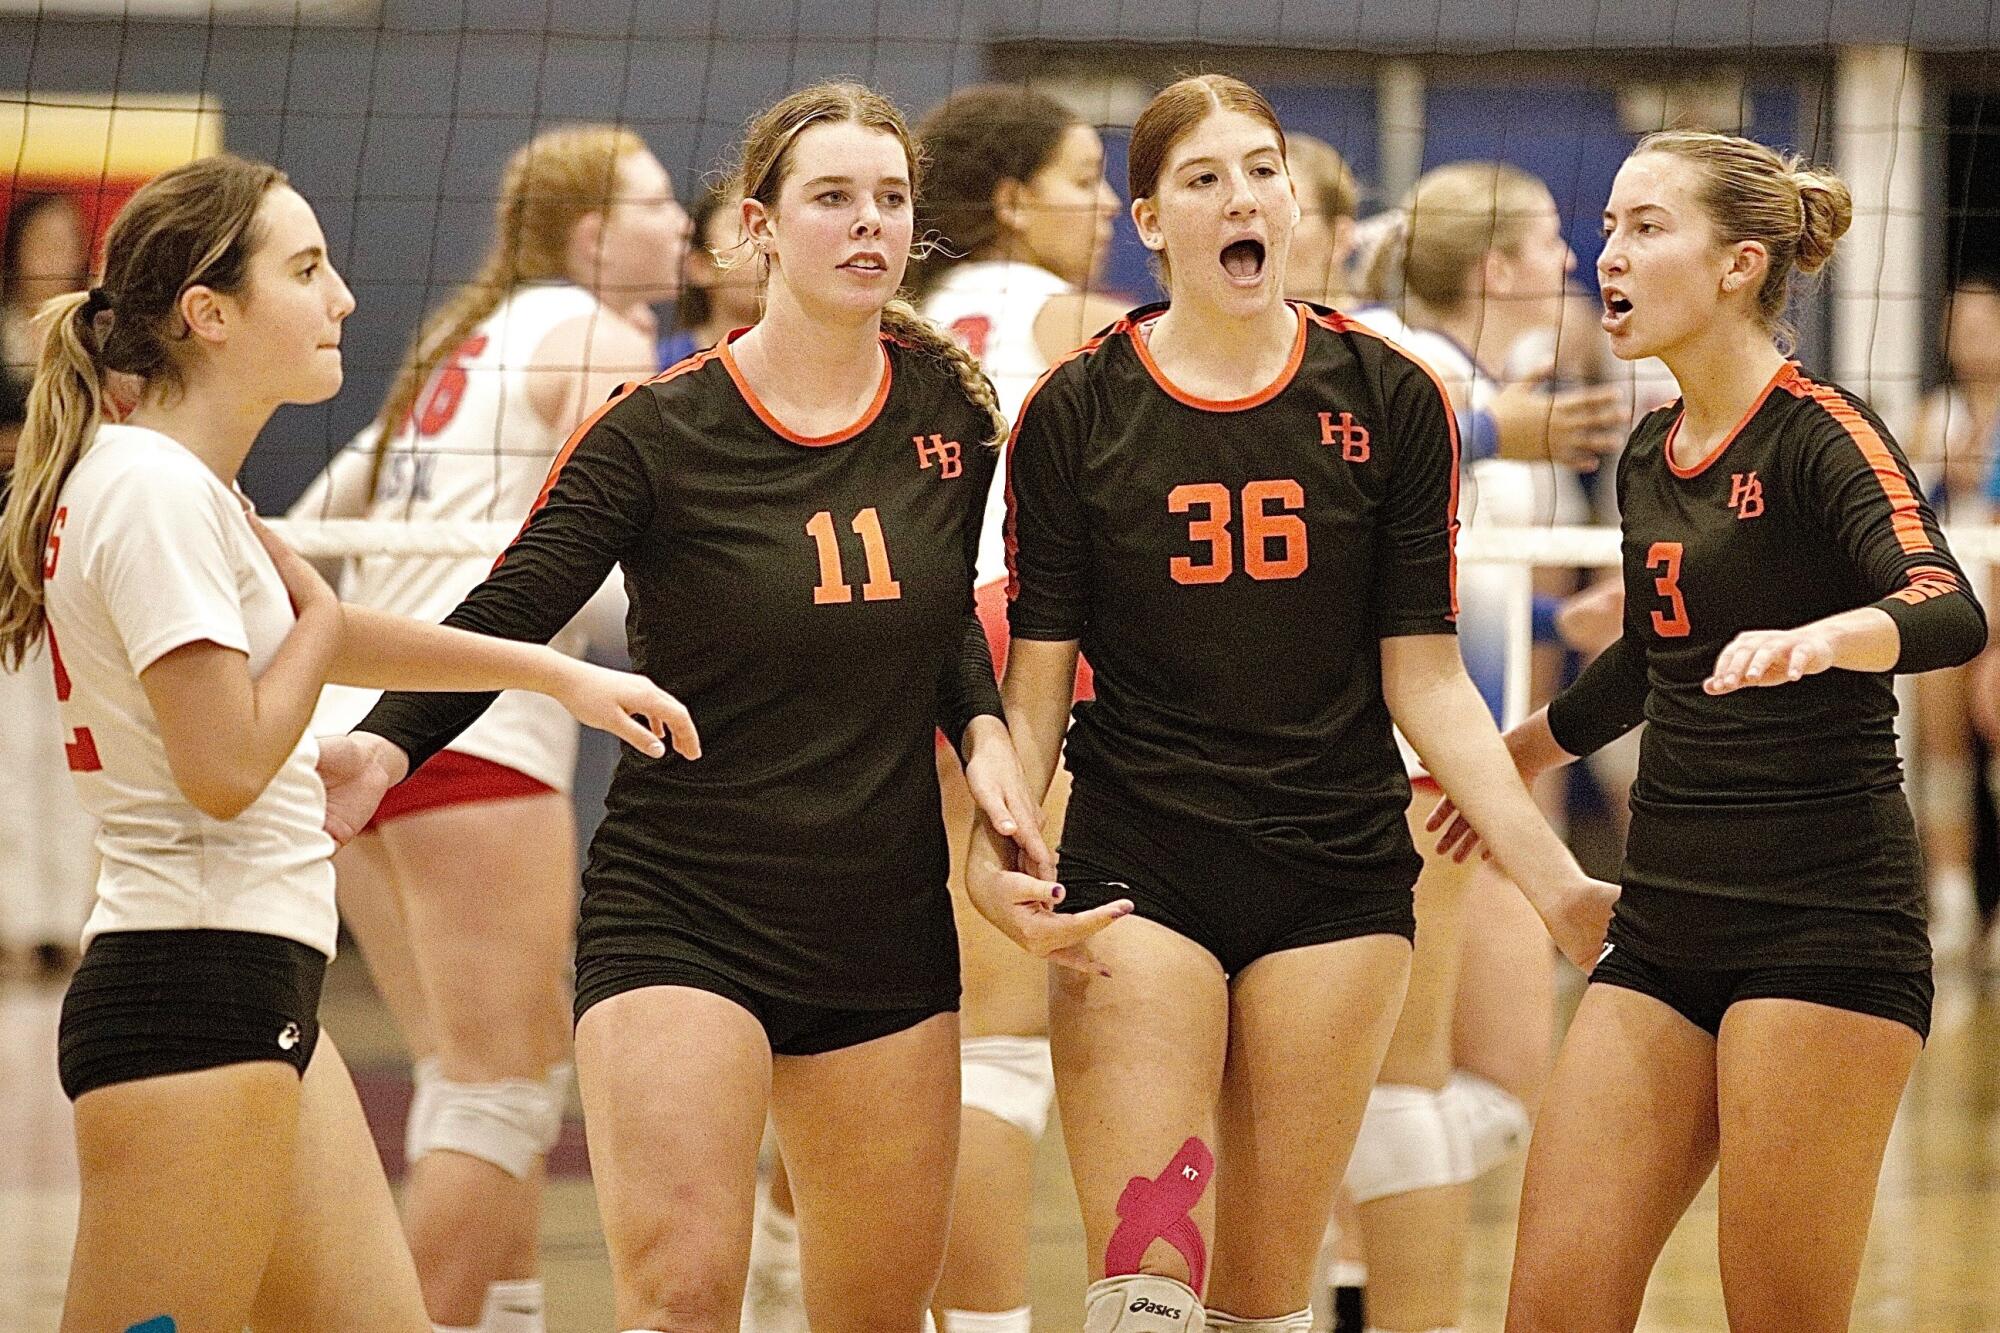 Huntington Beach players (from left) Olivia Foye, Haylee LaFontaine, Kylie Leopard and Dani Sparks huddle between points.